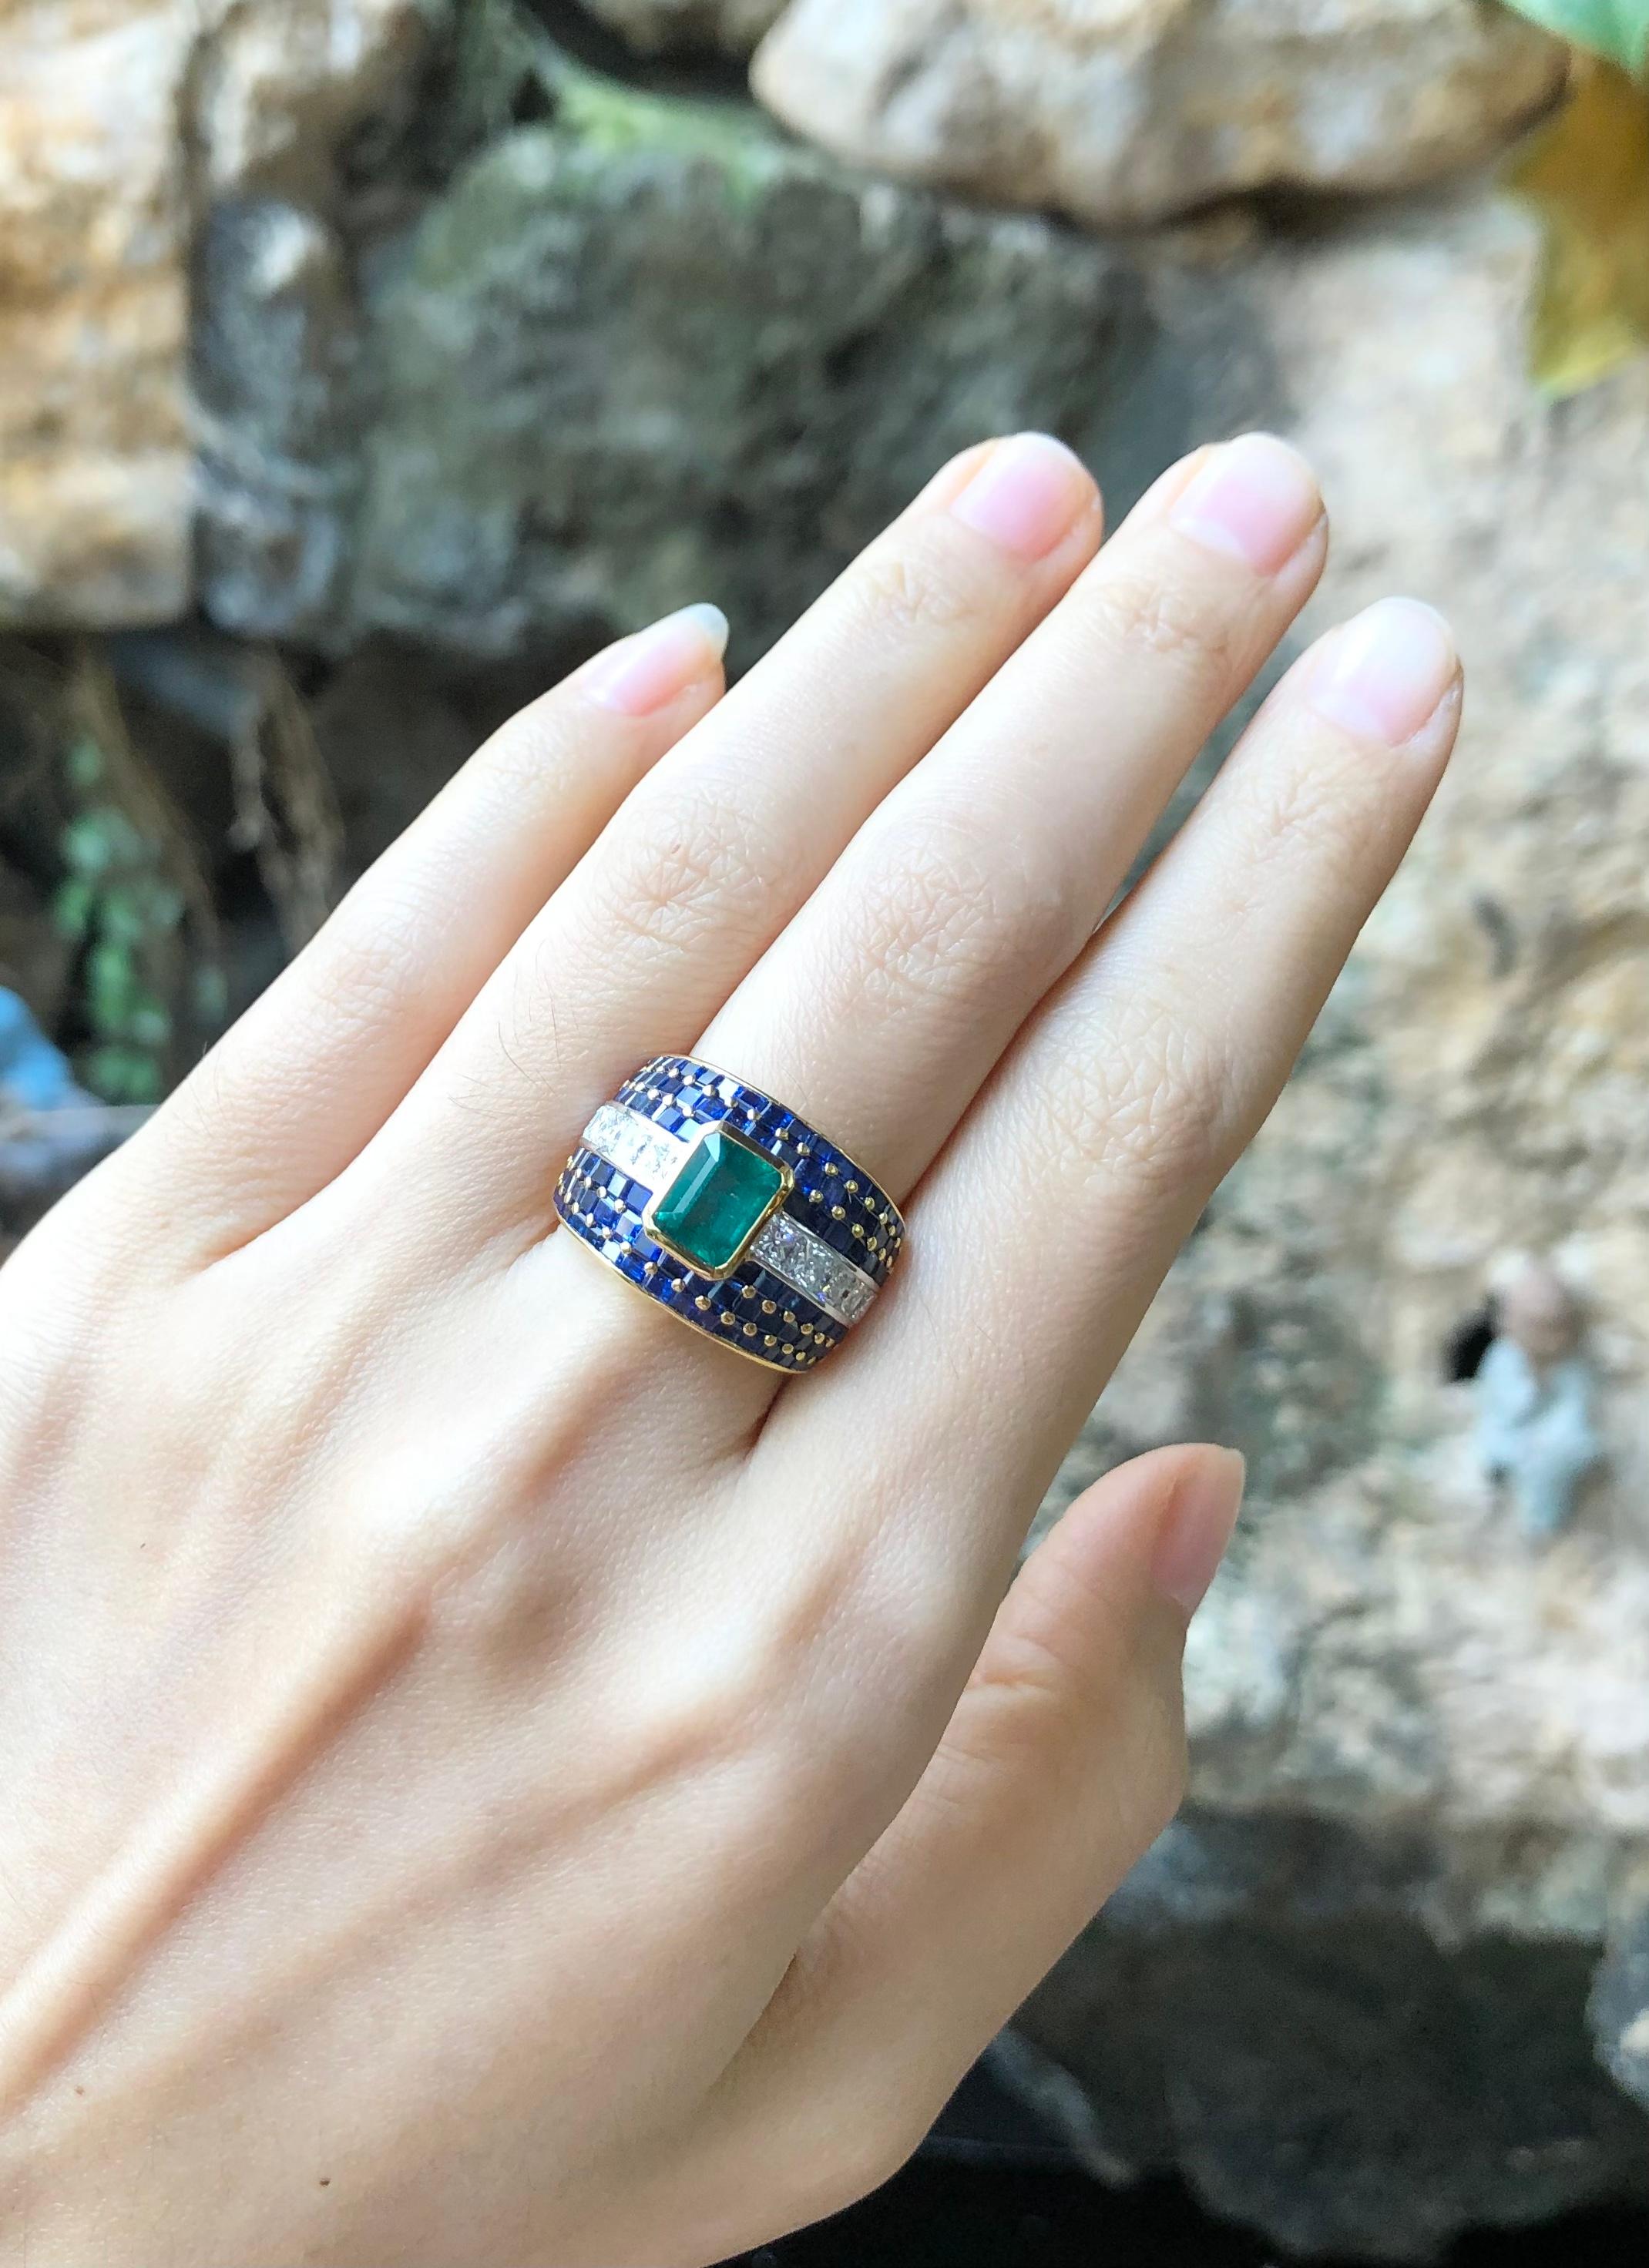 Emerald 1.35 carats with Blue Sapphire 5.06 carats with Diamond 1.08 carats Ring set in 18 Karat Gold Settings

Width:  2.1 cm 
Length: 1.5 cm
Ring Size: 50
Total Weight: 8.78 grams

